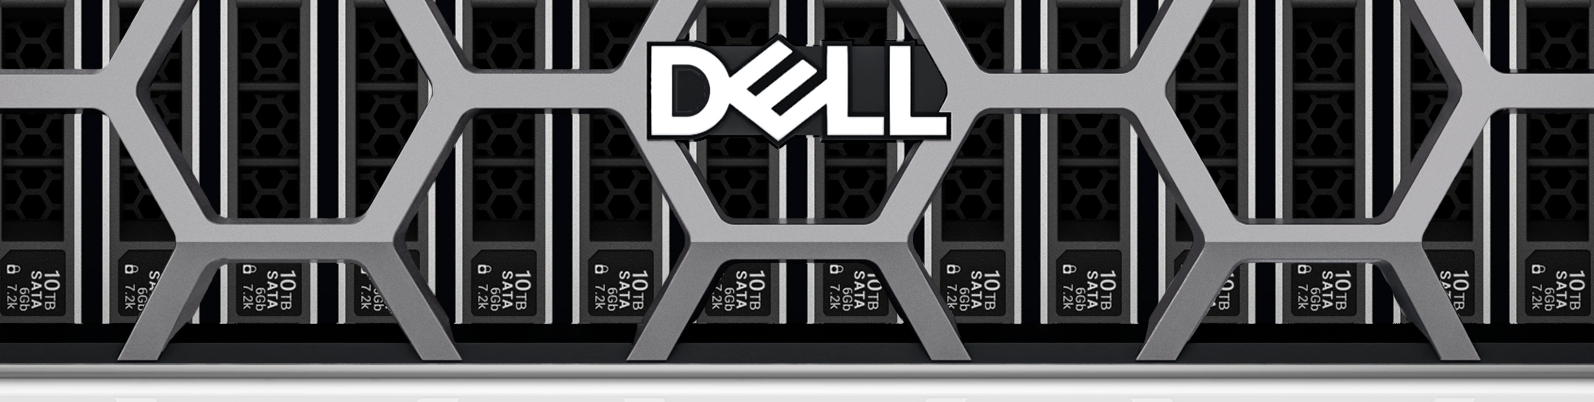 https://i.dell.com/is/image/DellContent/content/dam/ss2/product-images/dell-enterprise-products/enterprise-systems/poweredge/r760/media-gallery/server-poweredge-r760-black-gallery-2.psd?fmt=png-alpha&pscan=auto&scl=1&hei=402&wid=1594&qlt=100,1&resMode=sharp2&size=1594,402&chrss=full